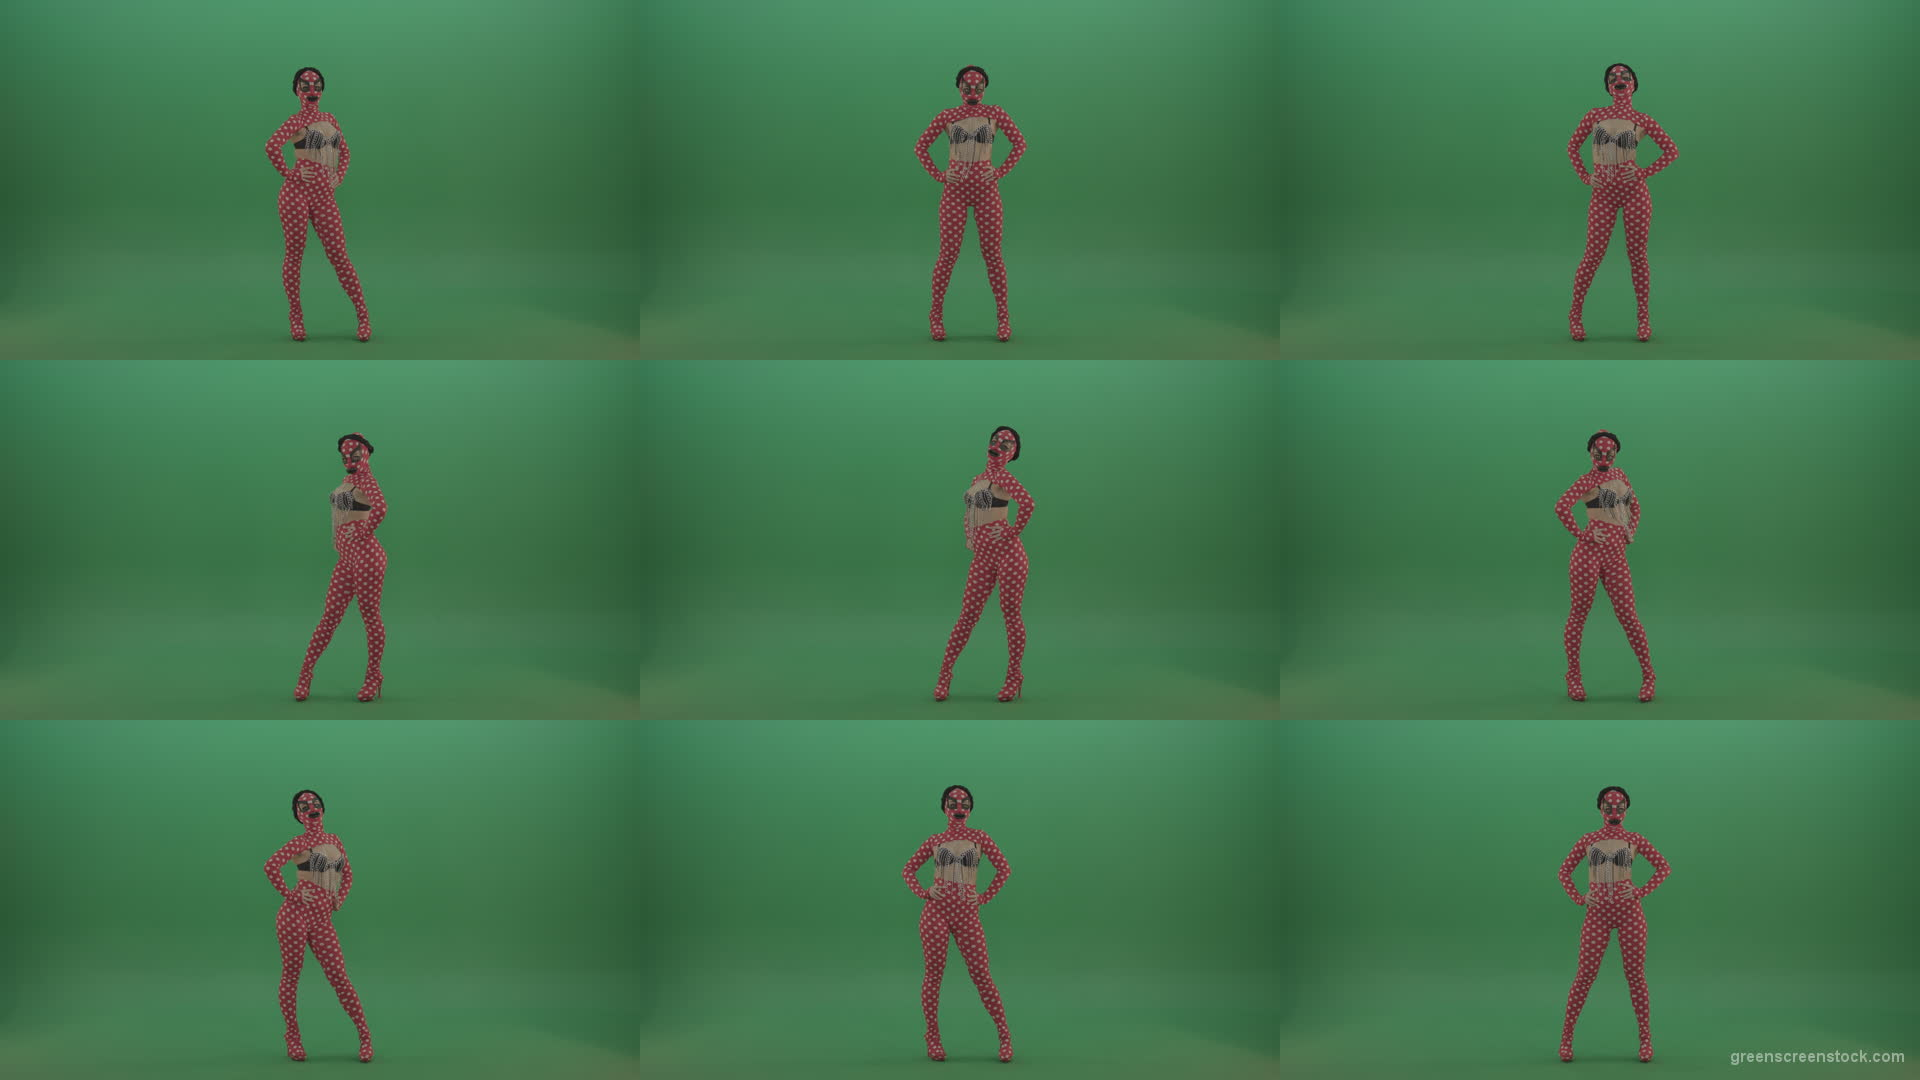 Girl-in-red-strip-dance-costume-in-front-view-posing-isolated-on-green-screen Green Screen Stock